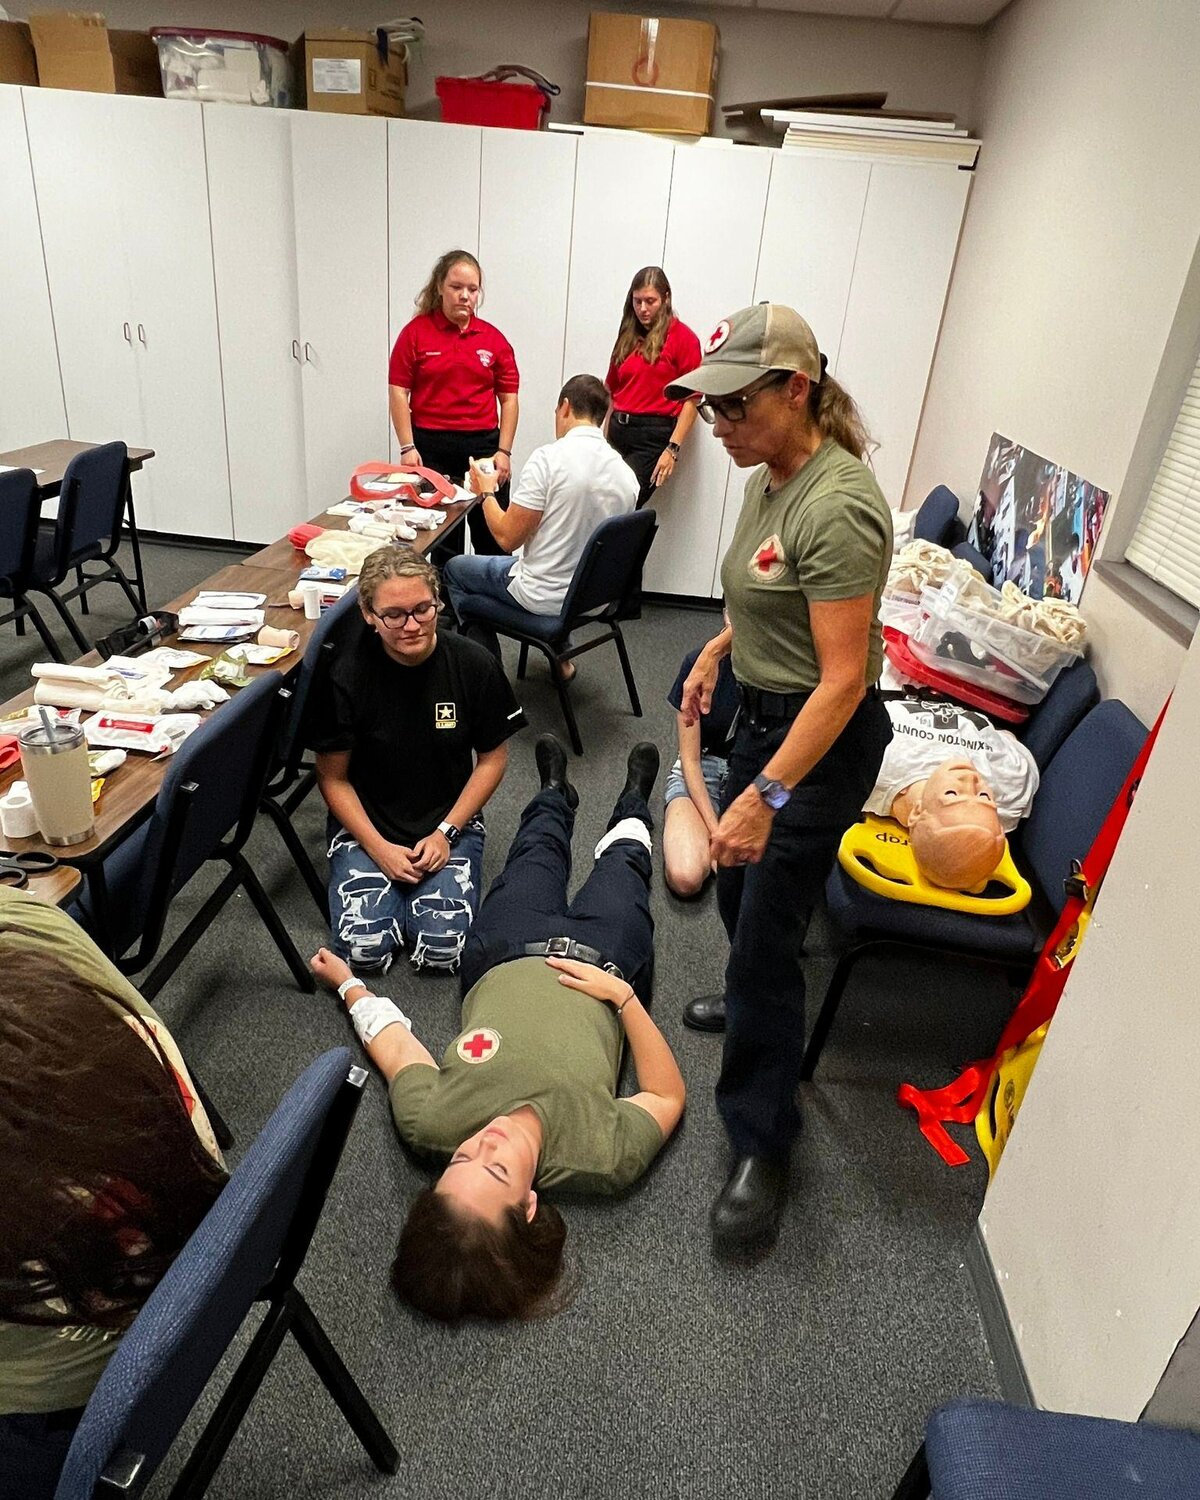 Members of of Lexington County's EMS Explorer program participating in training last year. The program aims to get those 14 to 21 interested in EMS as a potential career.